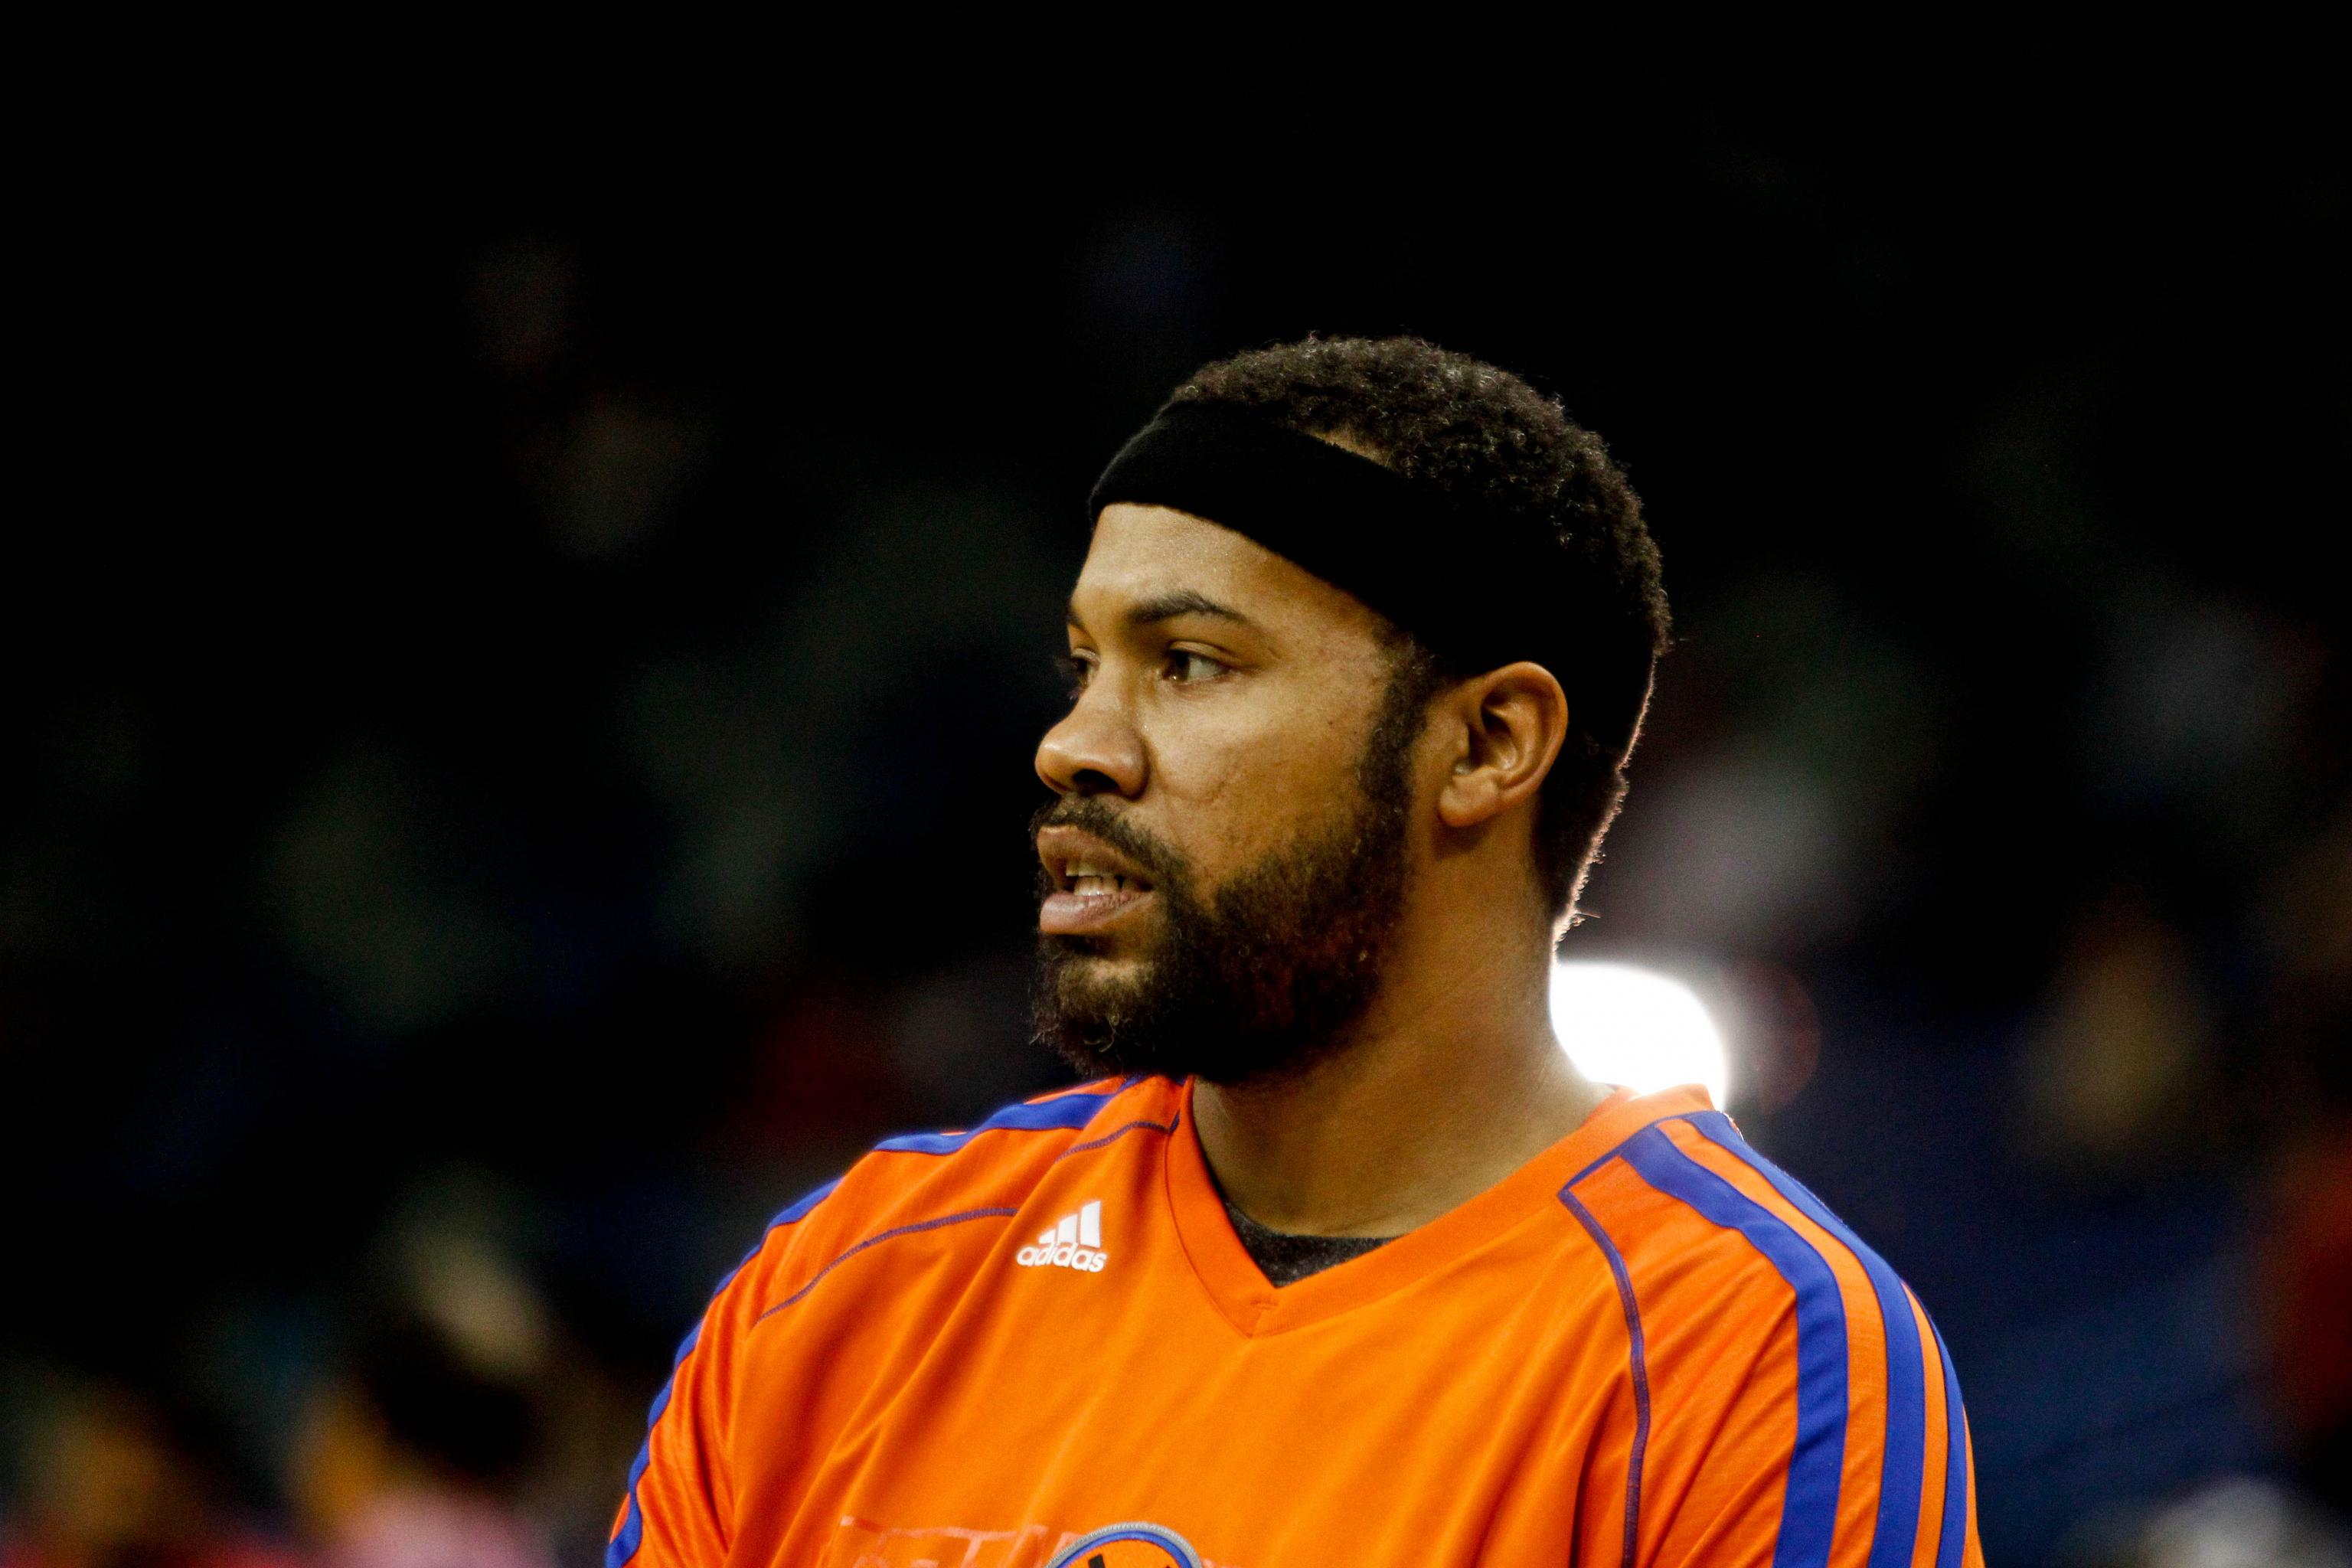 Rasheed Wallace on being sidelined: 'It's killing me' - Newsday